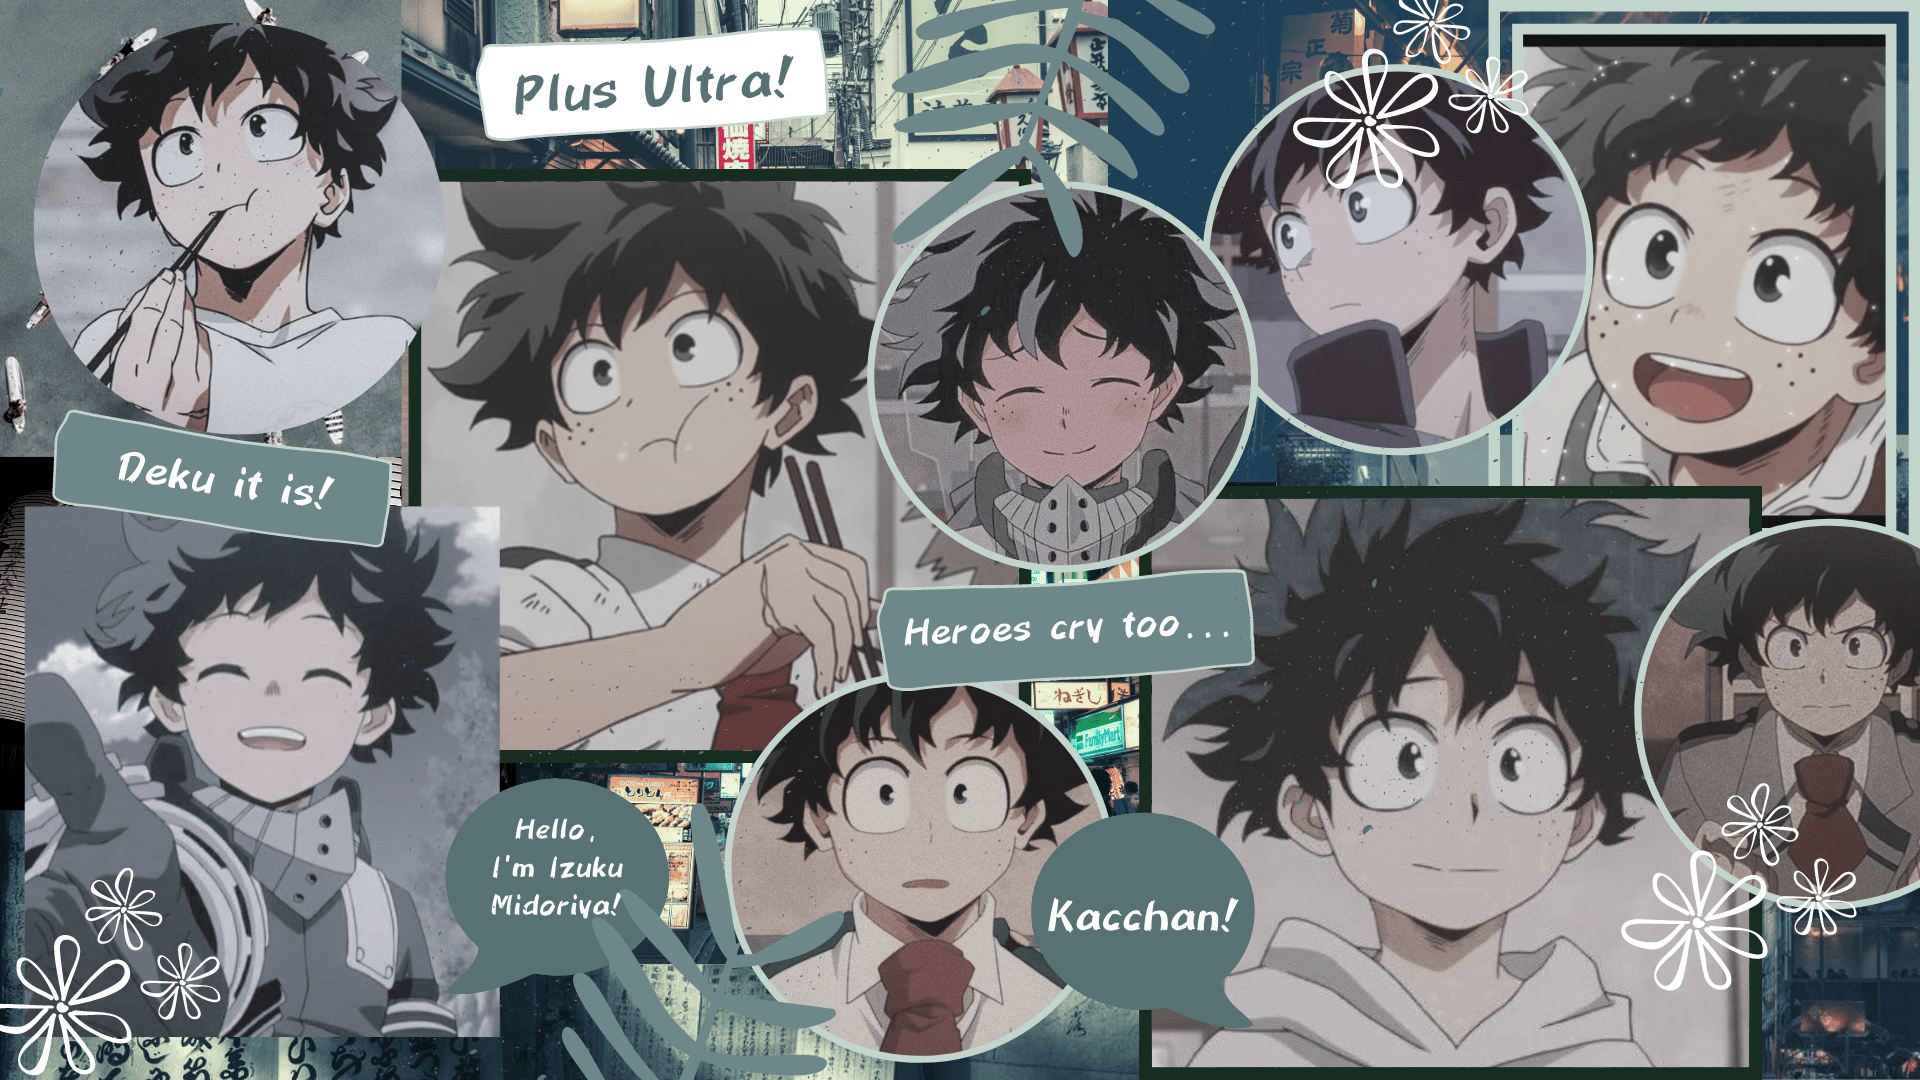 Collage of Midoriya's various expressions from the anime My Hero Academia - Deku